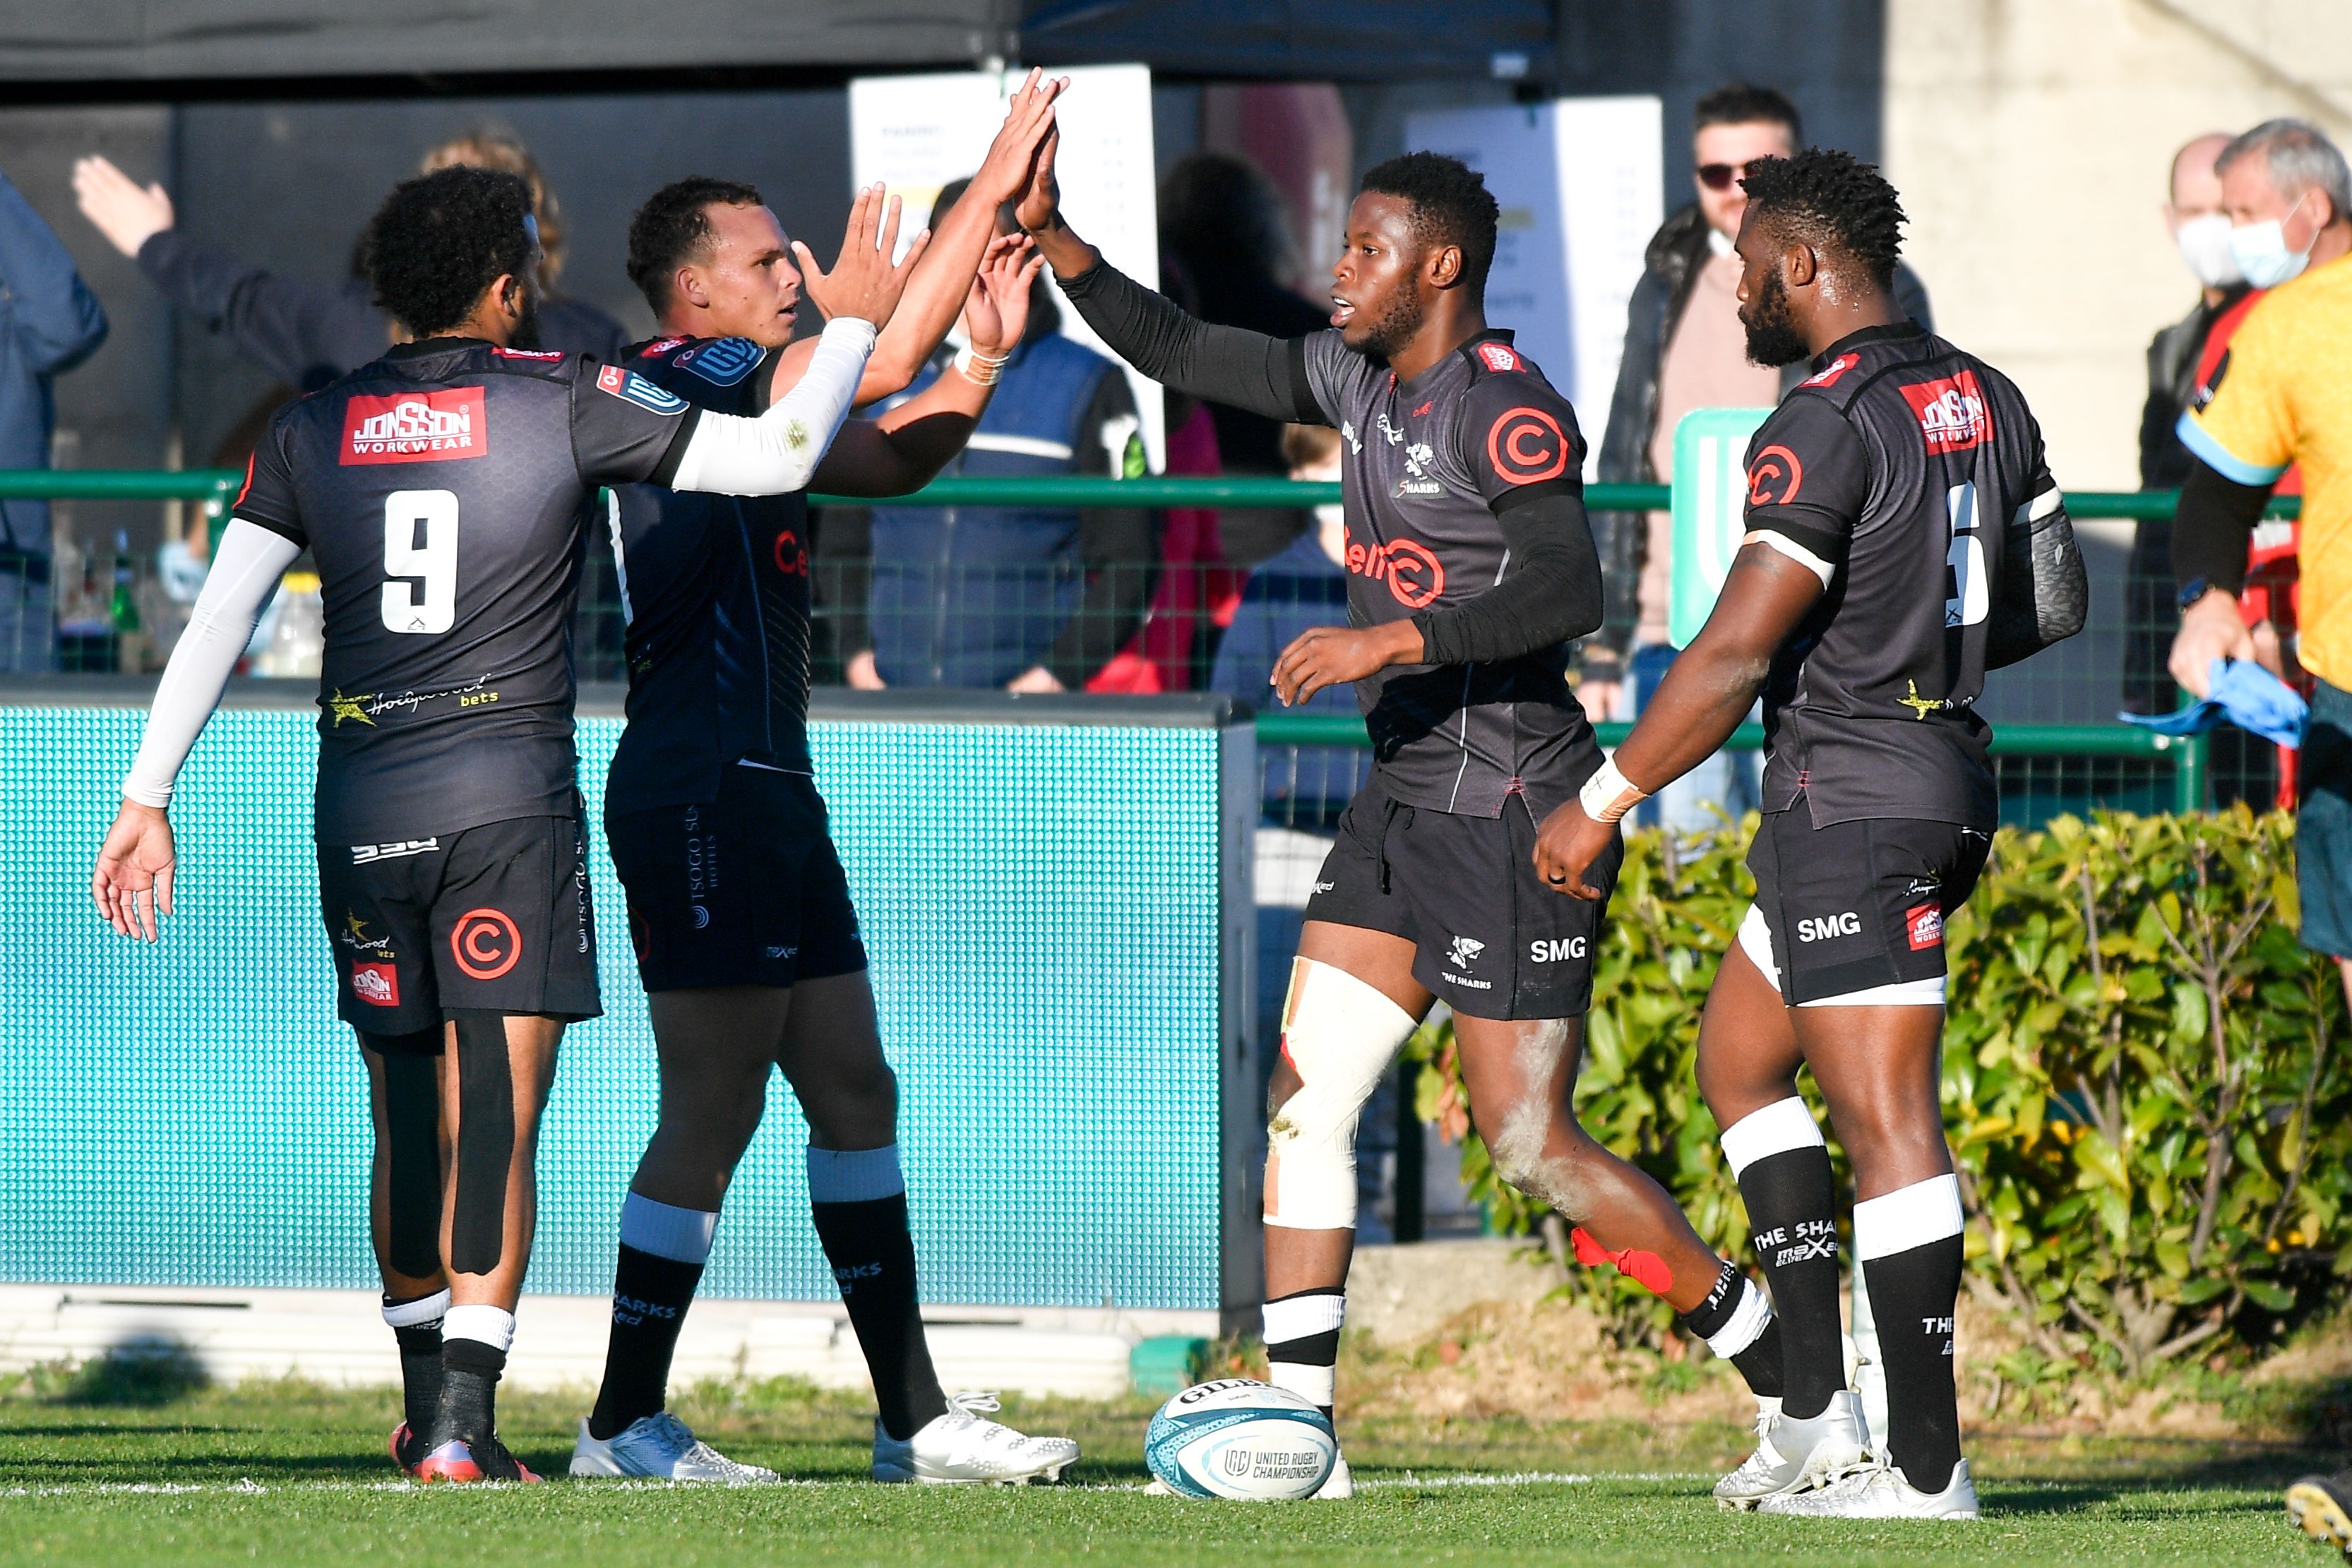 Mandatory Credit: Photo by Luca Sighniolfi/INPHO/Shutterstock/BackpagePix (12824431t) Benetton Rugby vs Cell C Sharks. Sharks' Aphelele Fassi celebrates scoring their second try with teammates United Rugby Championship, Stadio Monigo, Treviso, Italy - 26 Feb 2022